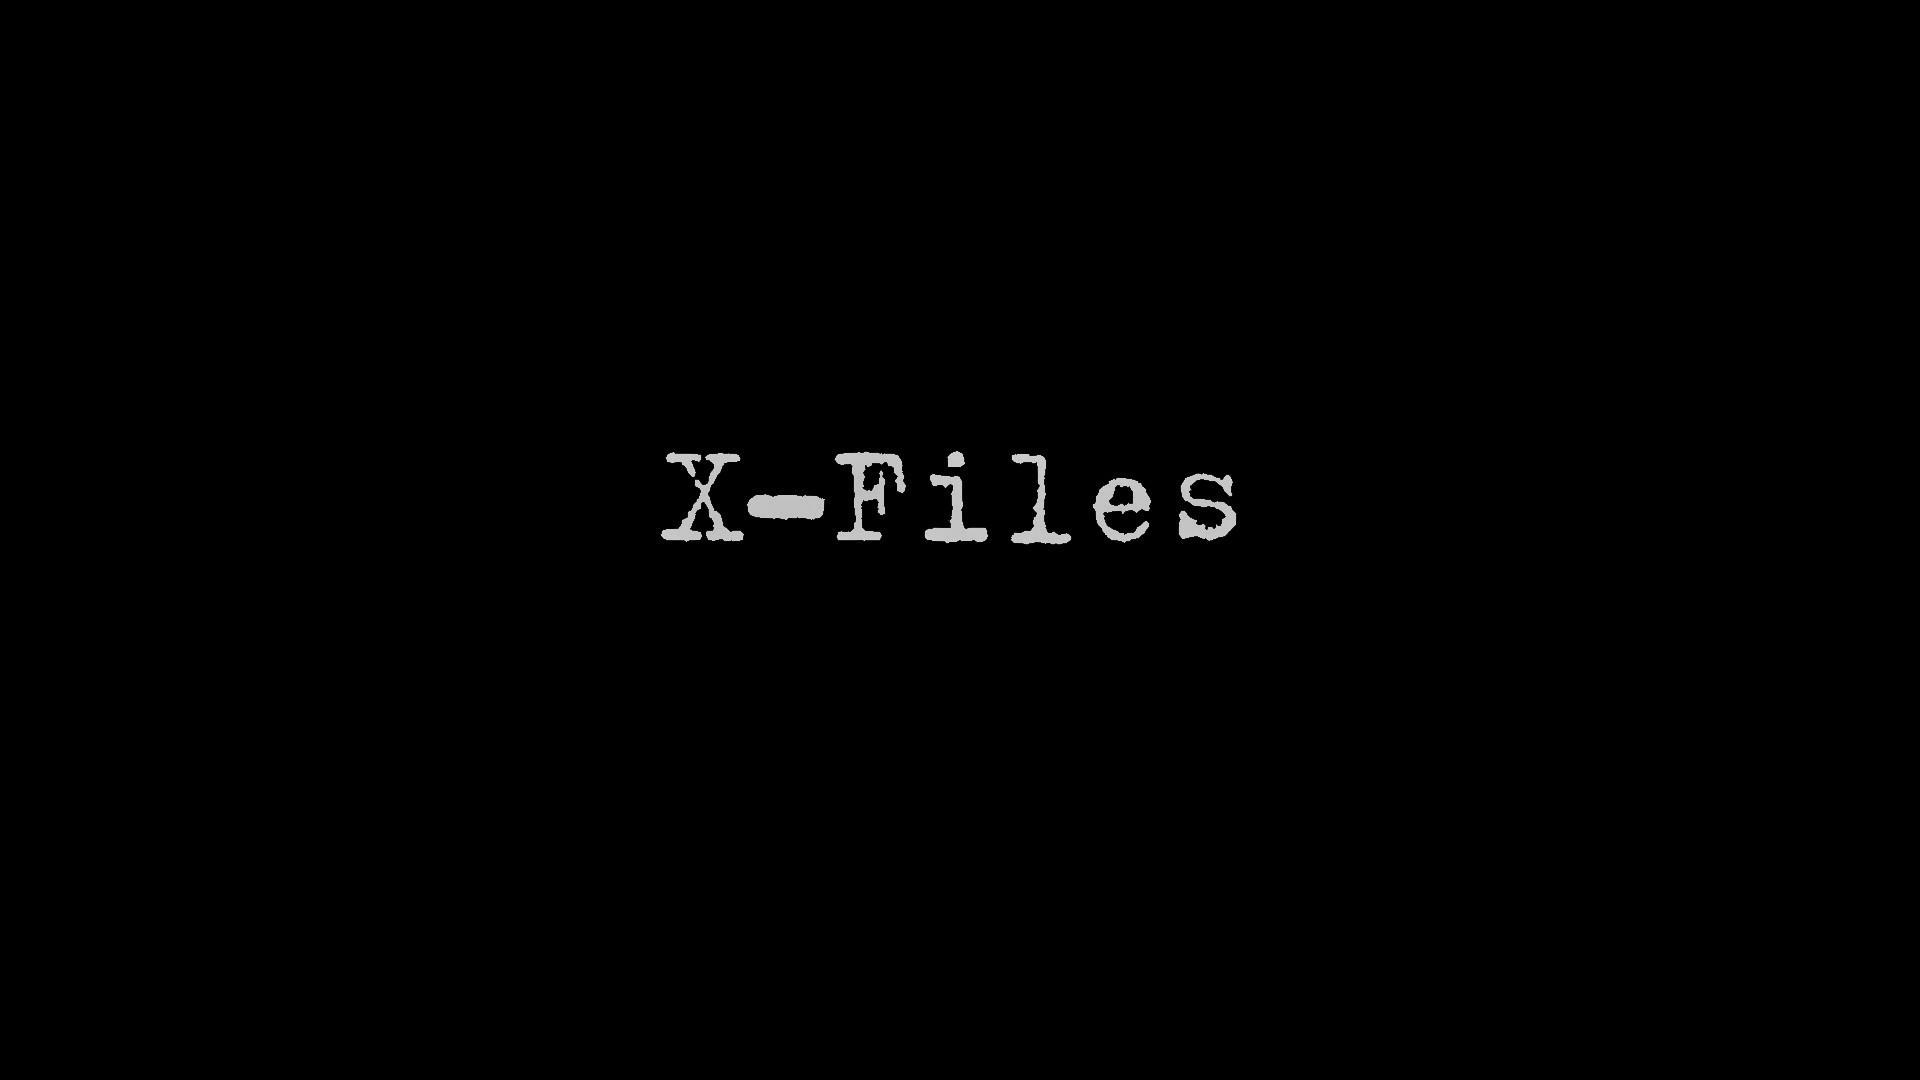 The X Files Clean Wallpaper